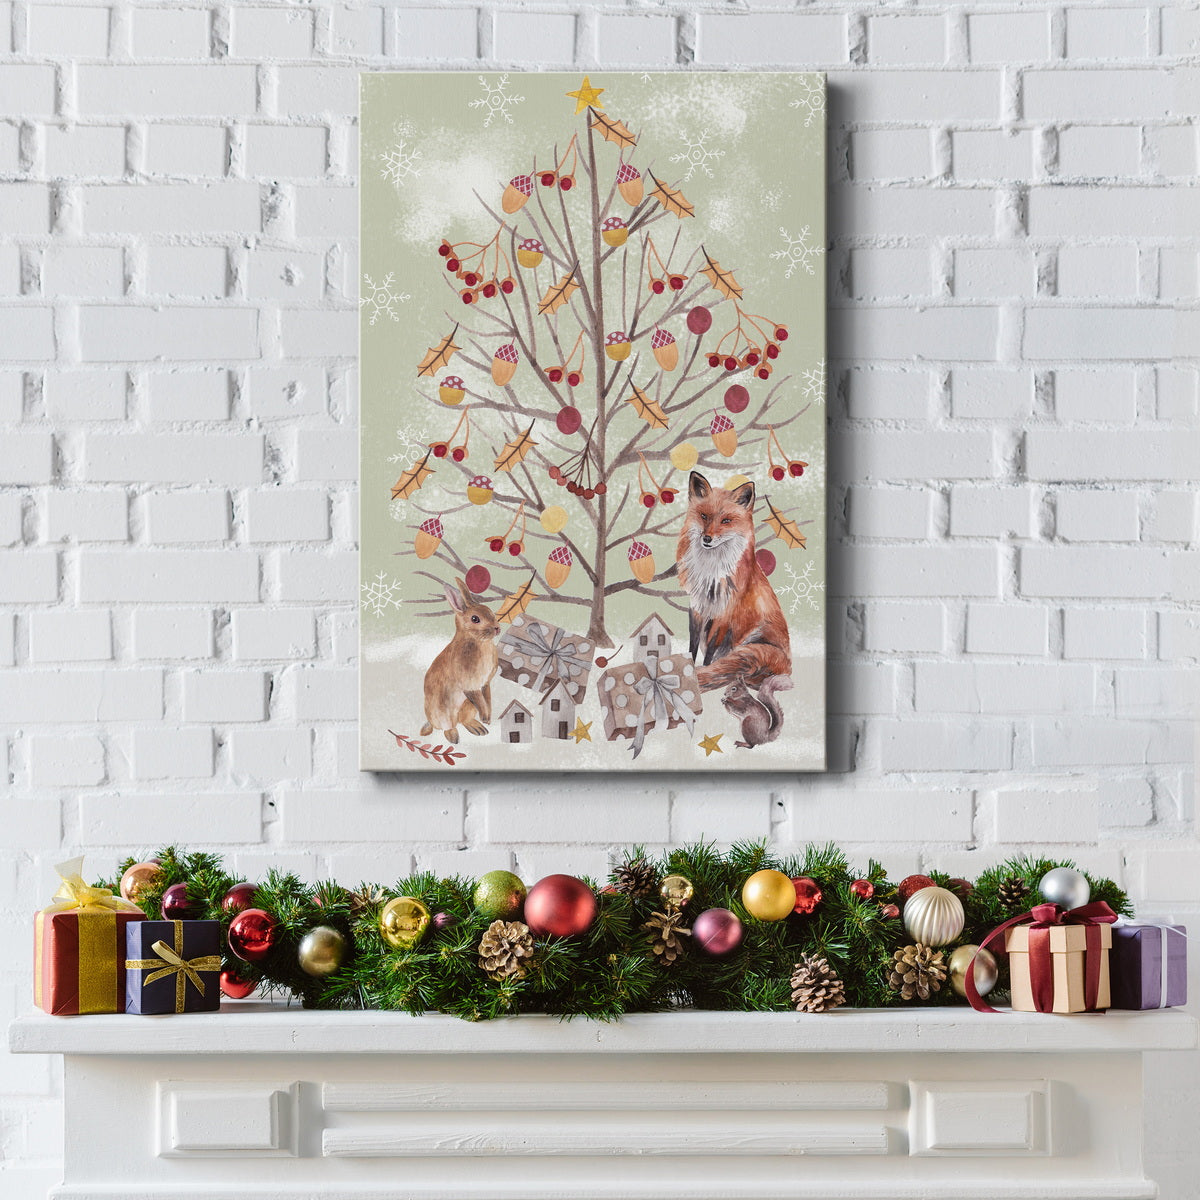 Christmas Time Collection B - Gallery Wrapped Canvas